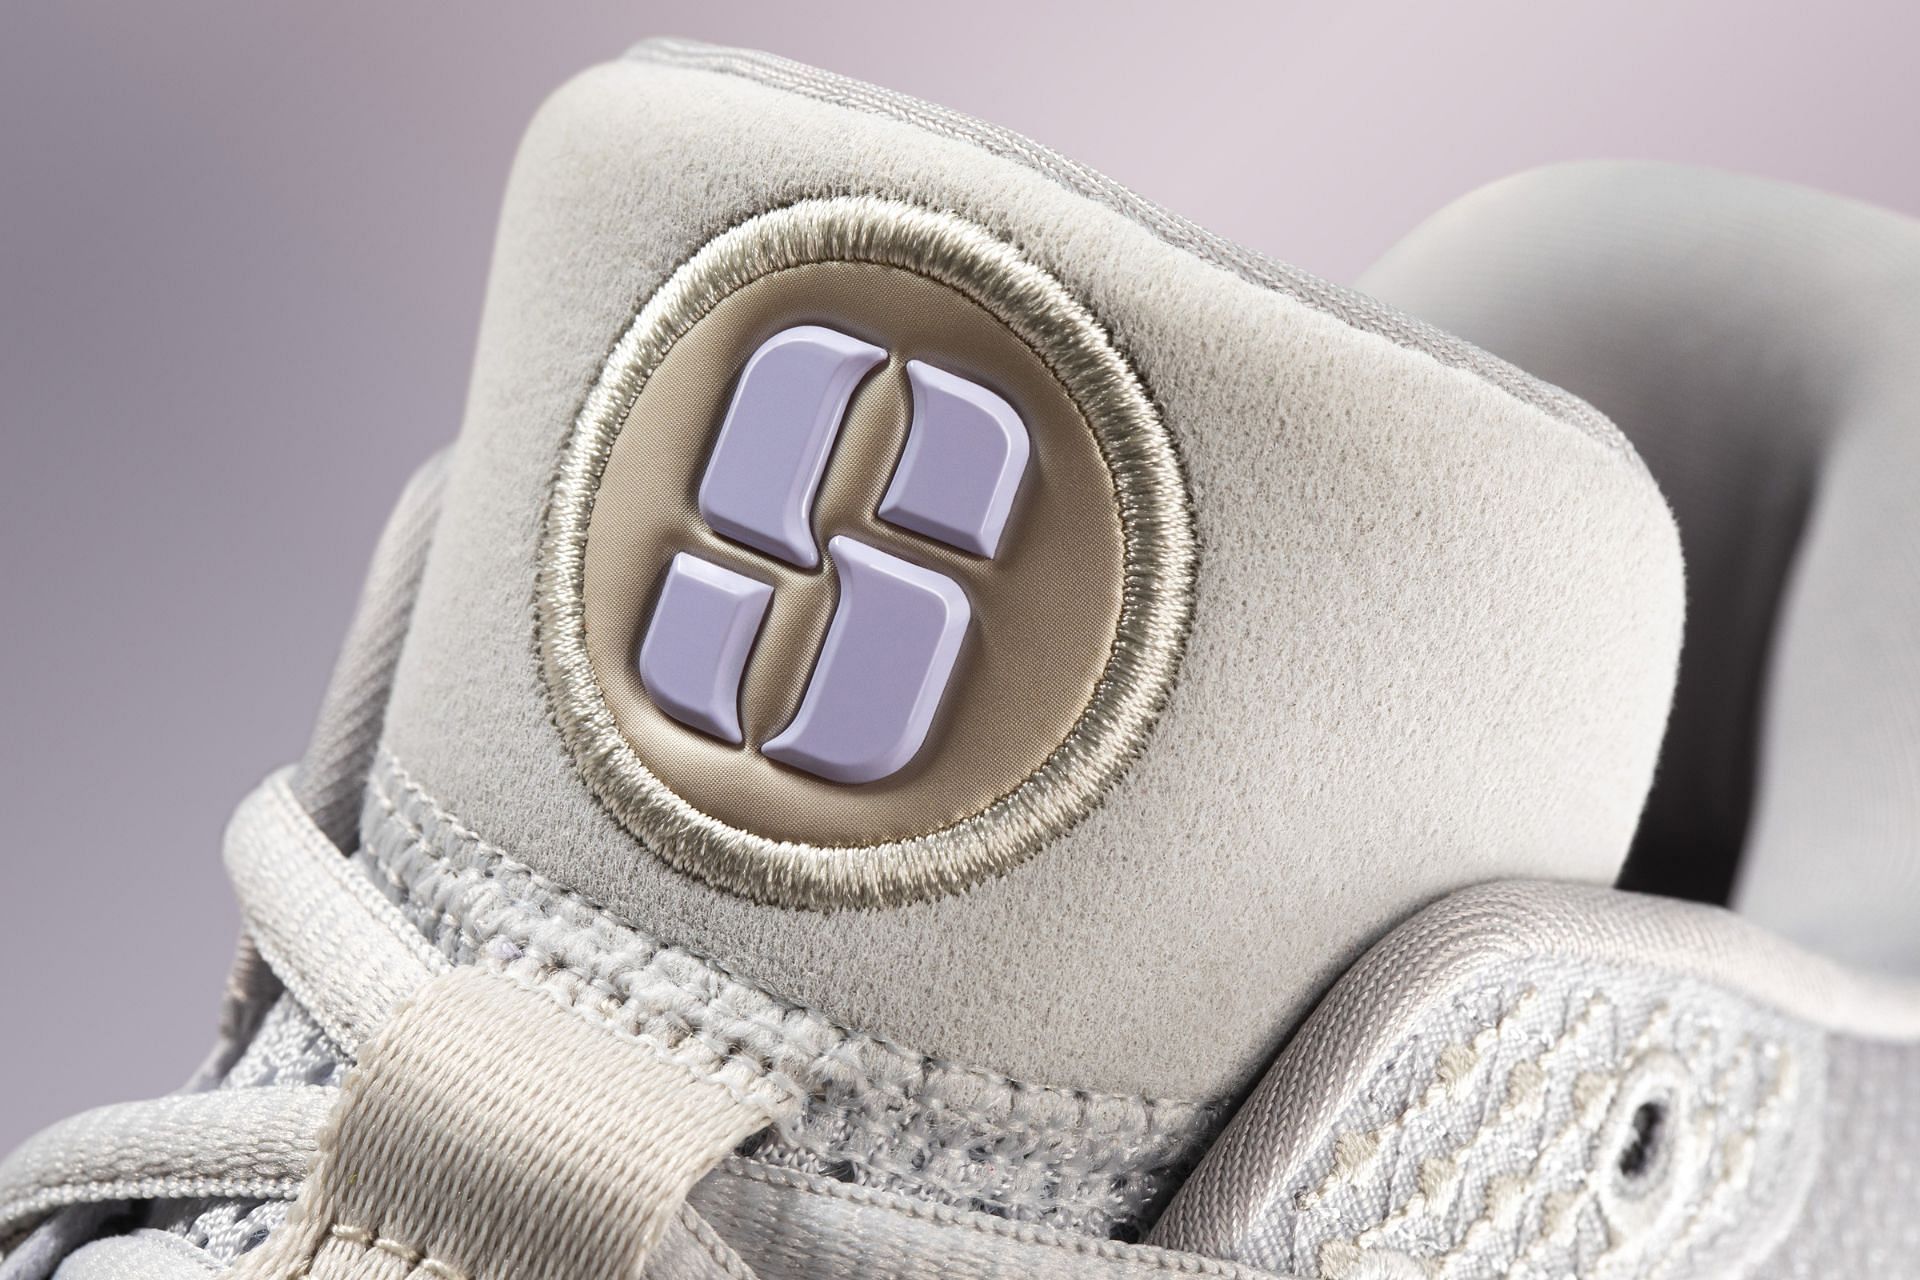 Take a closer look at the tongue area and branding accent of the Nike Sabrina 1 sneaker (Image via Nike)